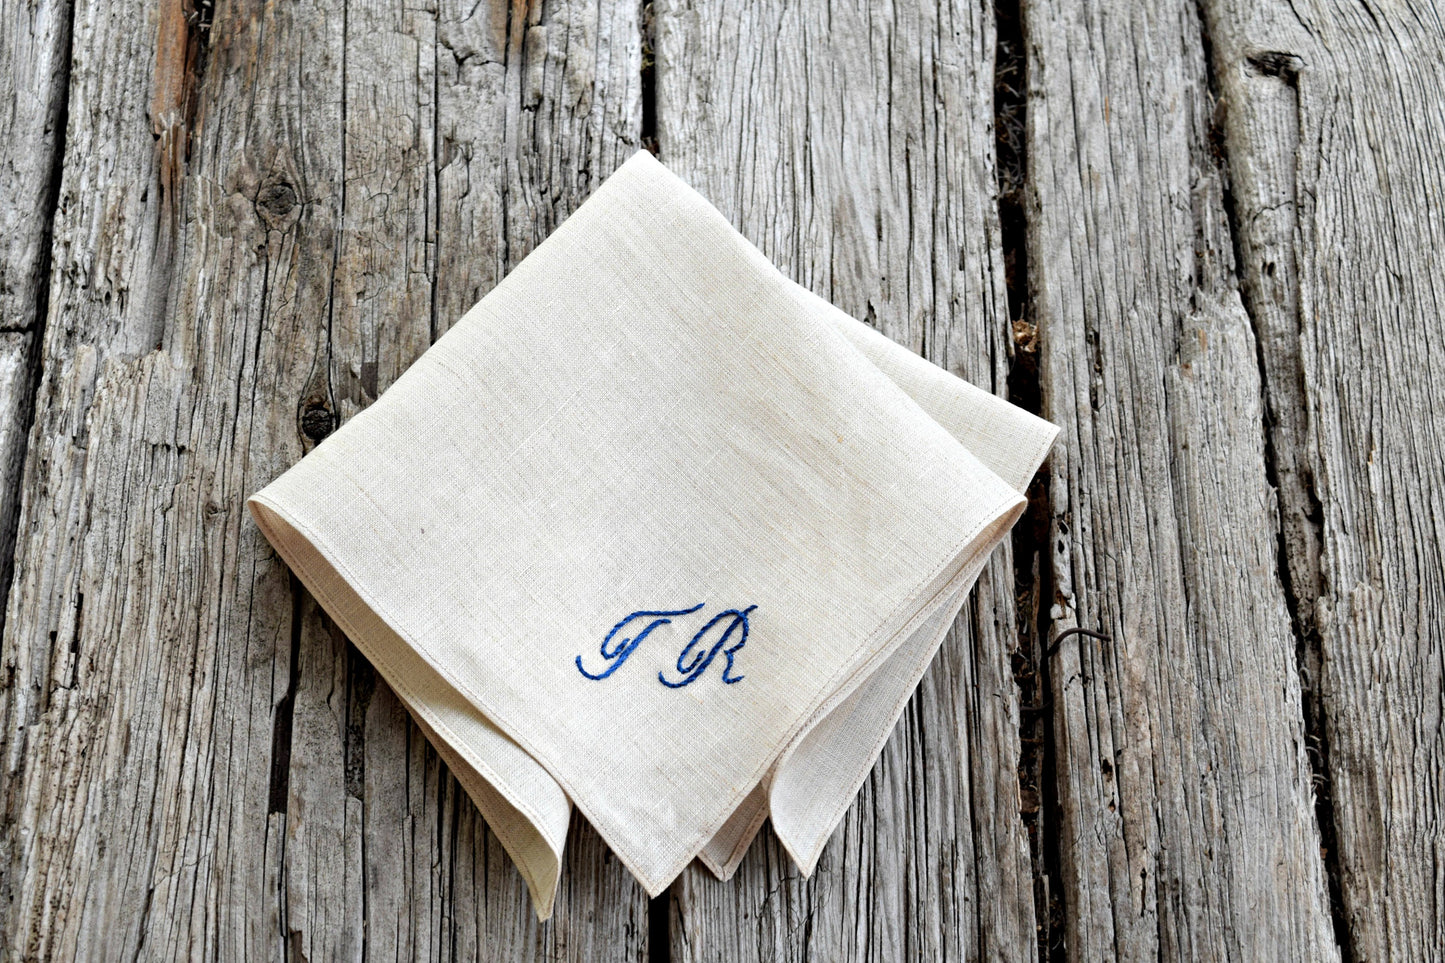 Oatmeal Linen Handkerchief Monogrammed with Two Initials: Simple and Sweet